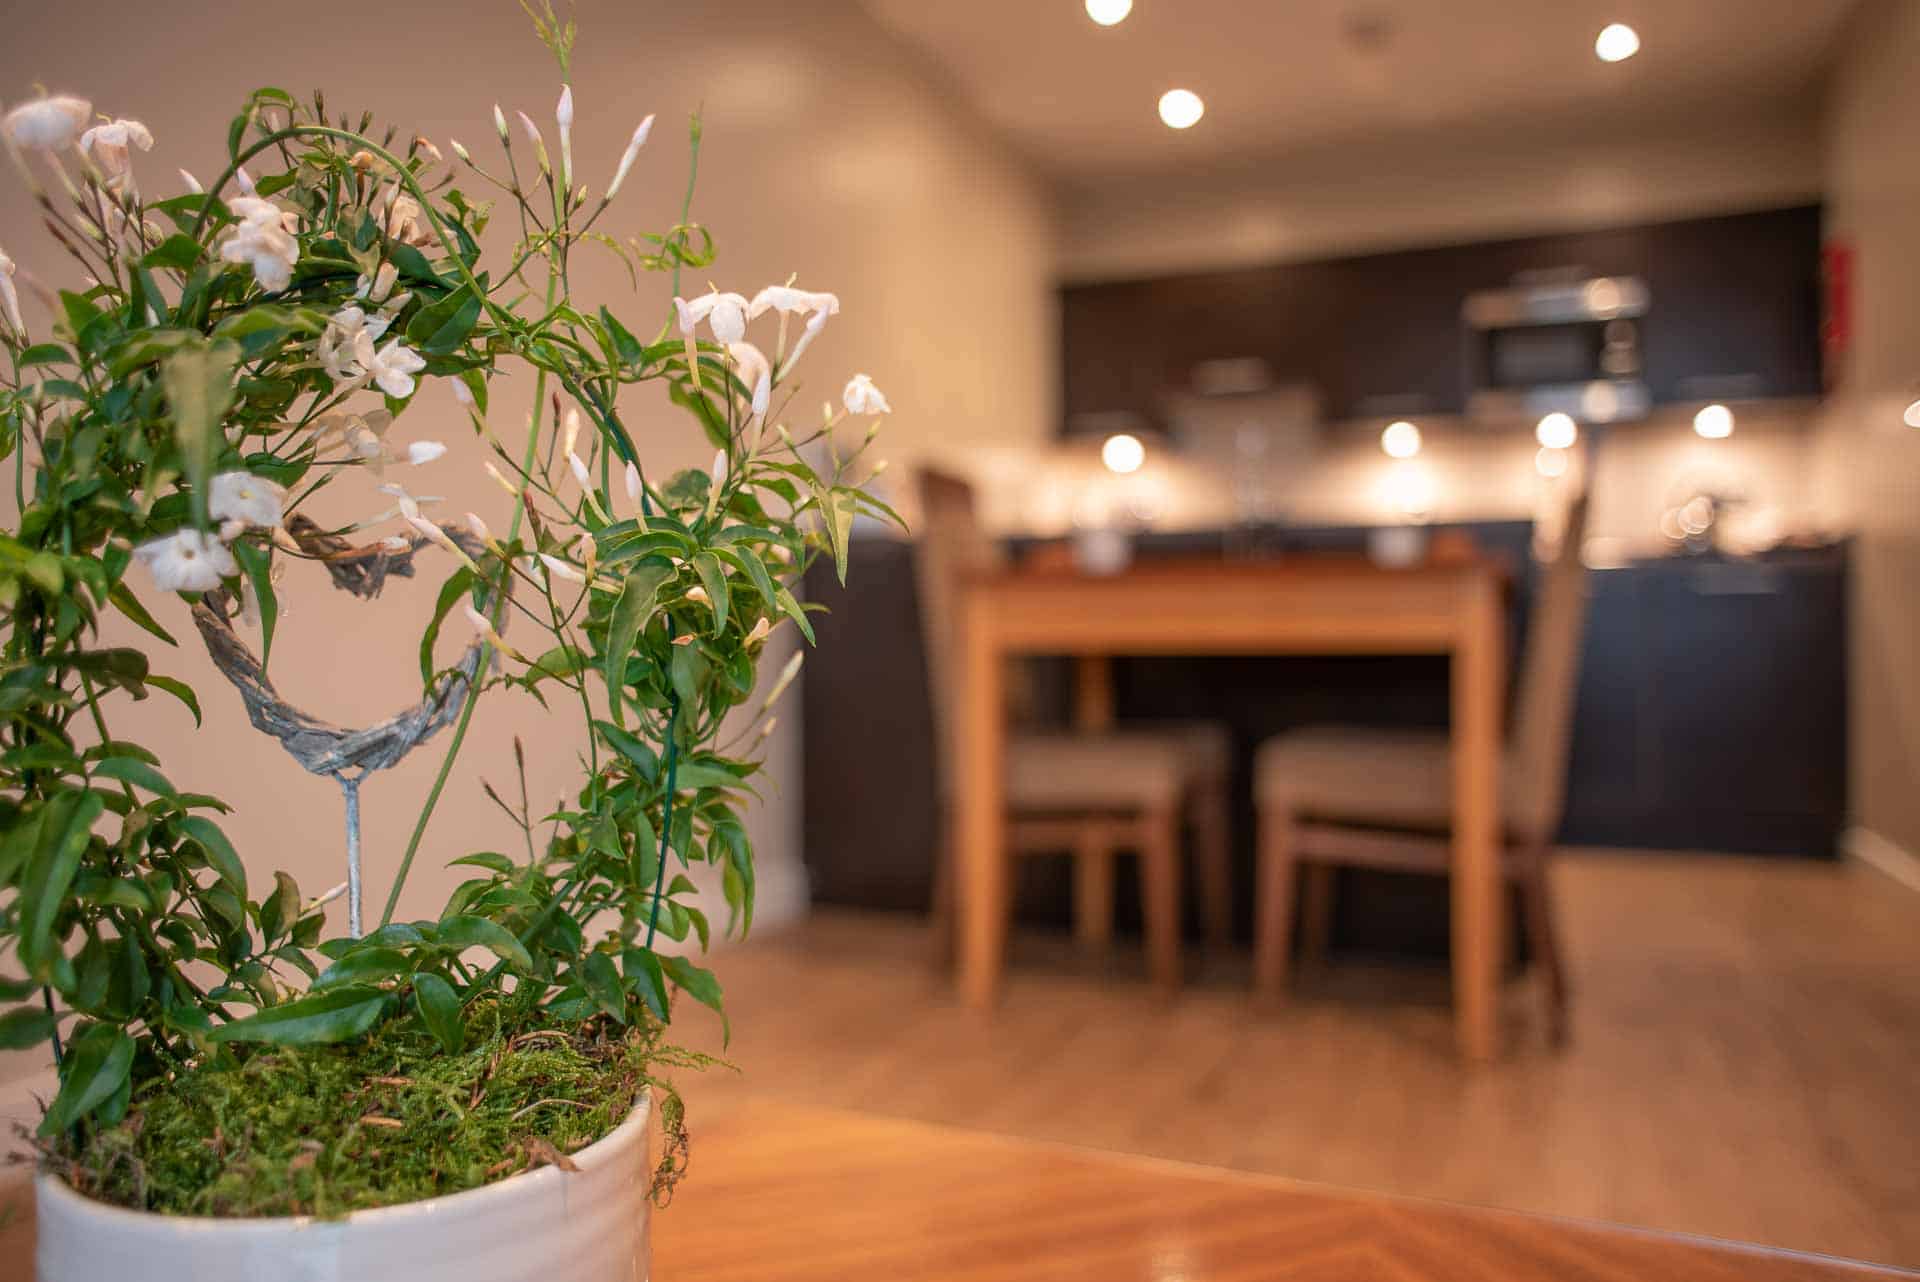 Decorative plant displayed at PREMIER SUITES Manchester apartment with dining table and kitchen in the background